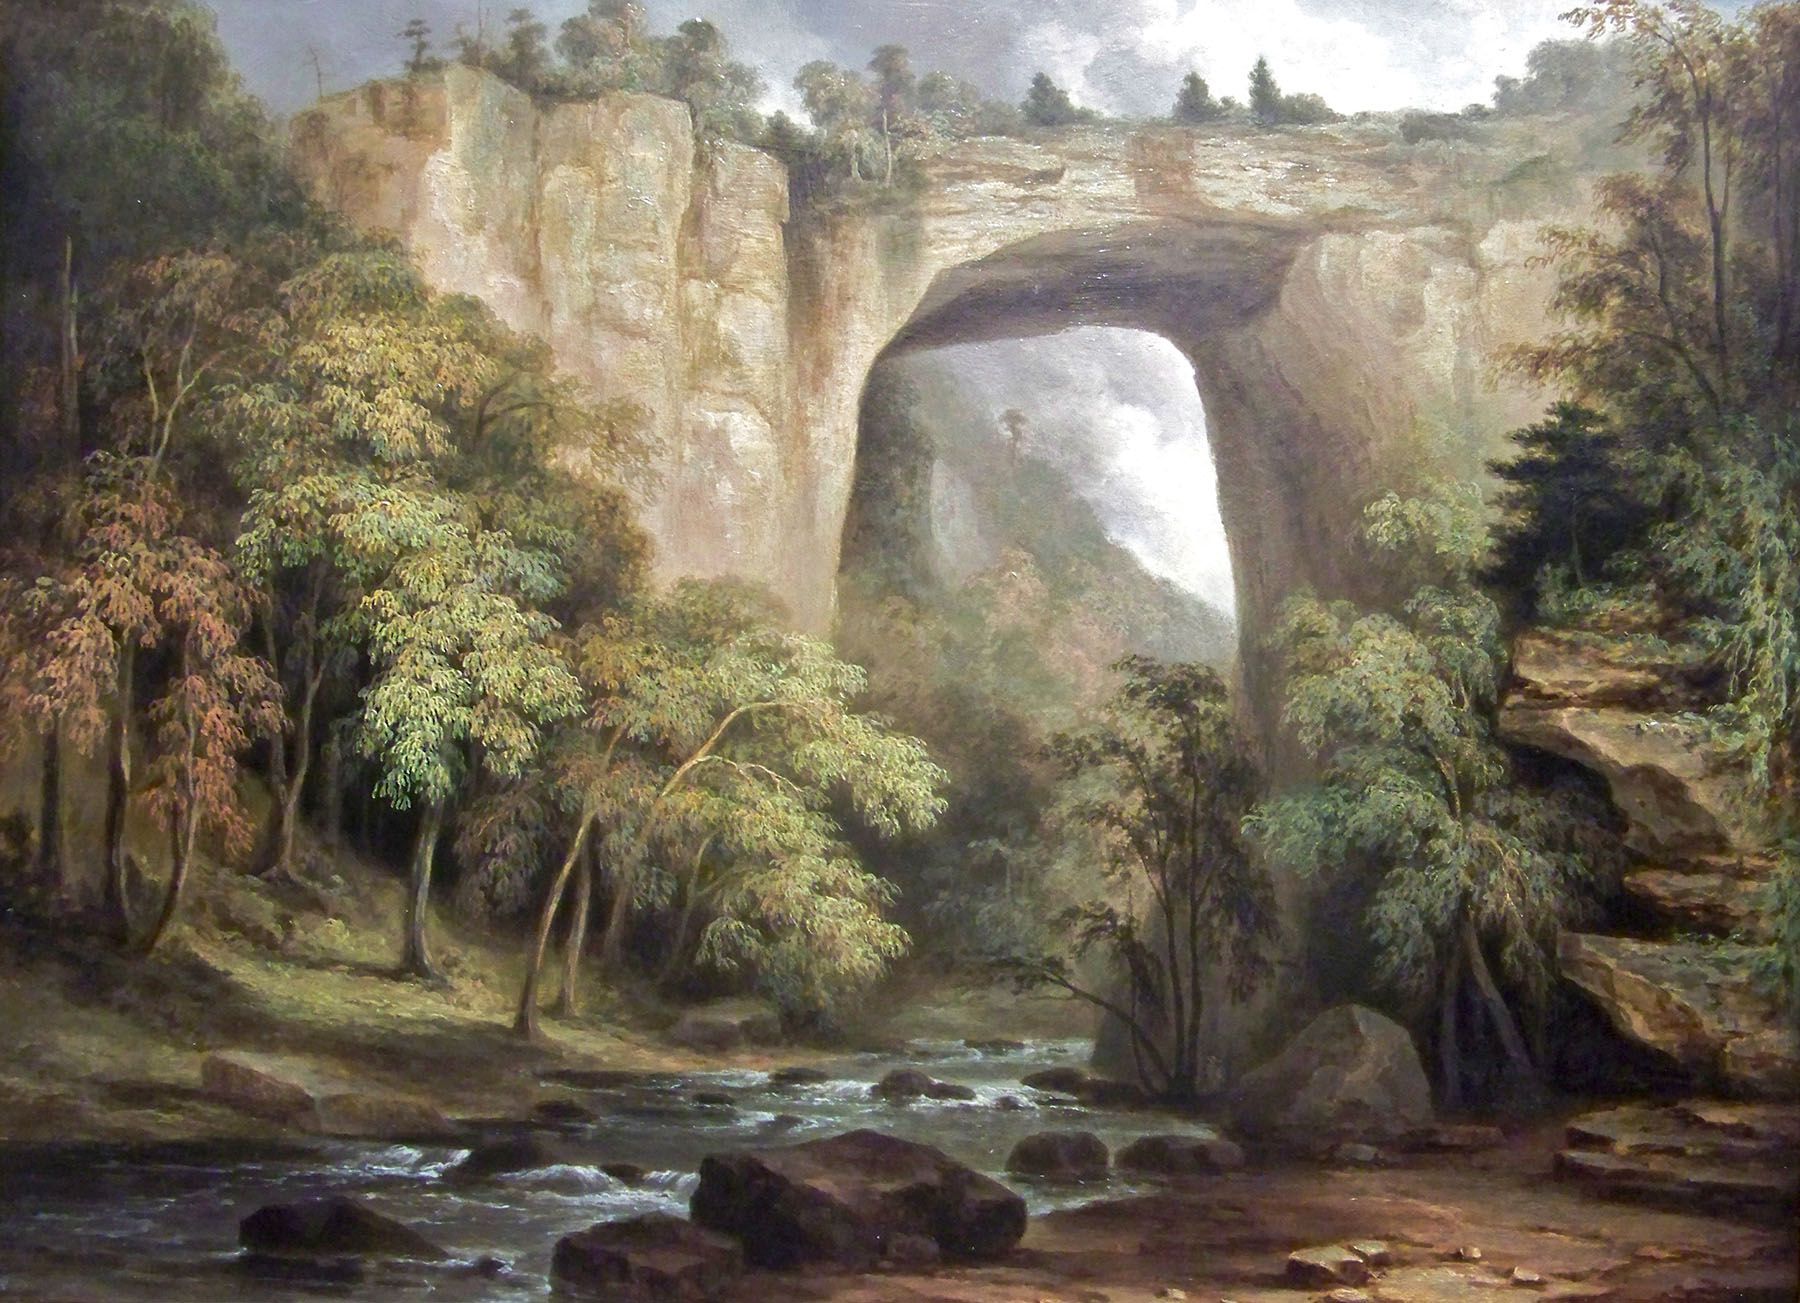 Painting of the Natural bridge